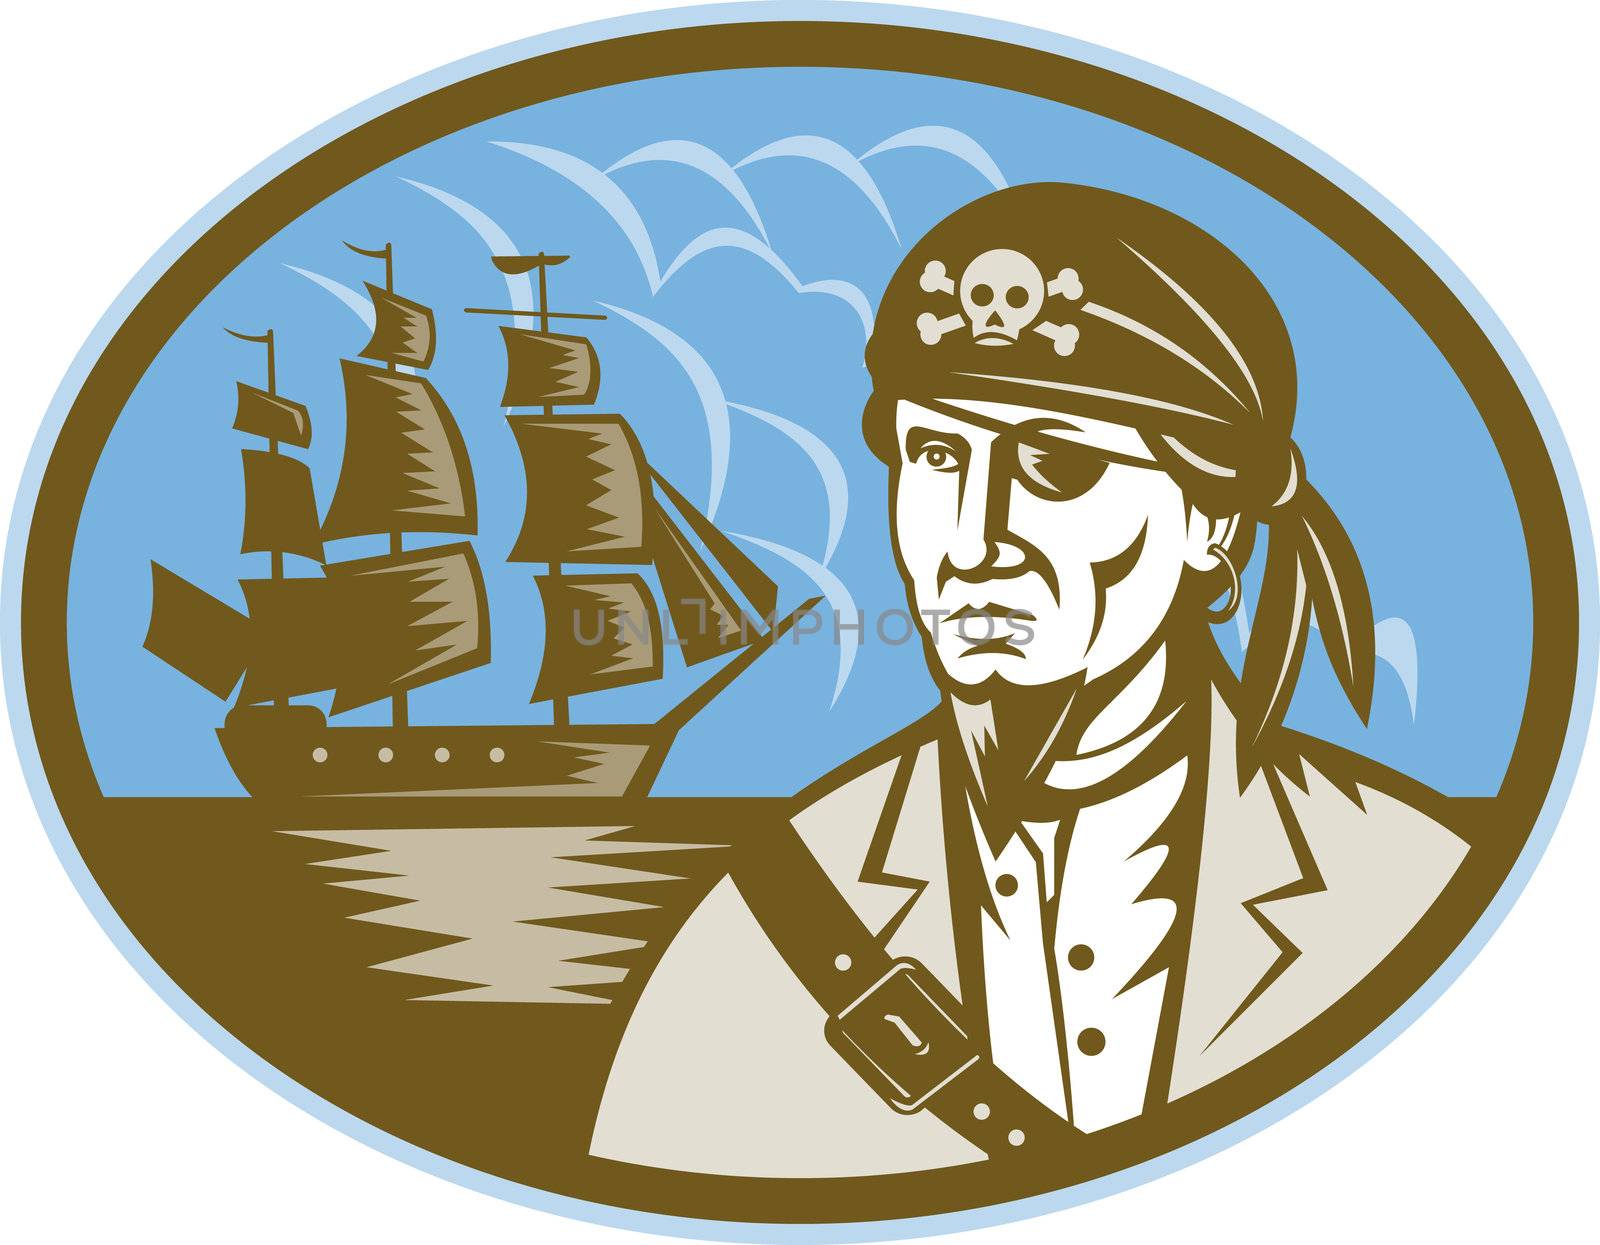 illustration of a Pirate with sailing tall ship in background done in woodcut style